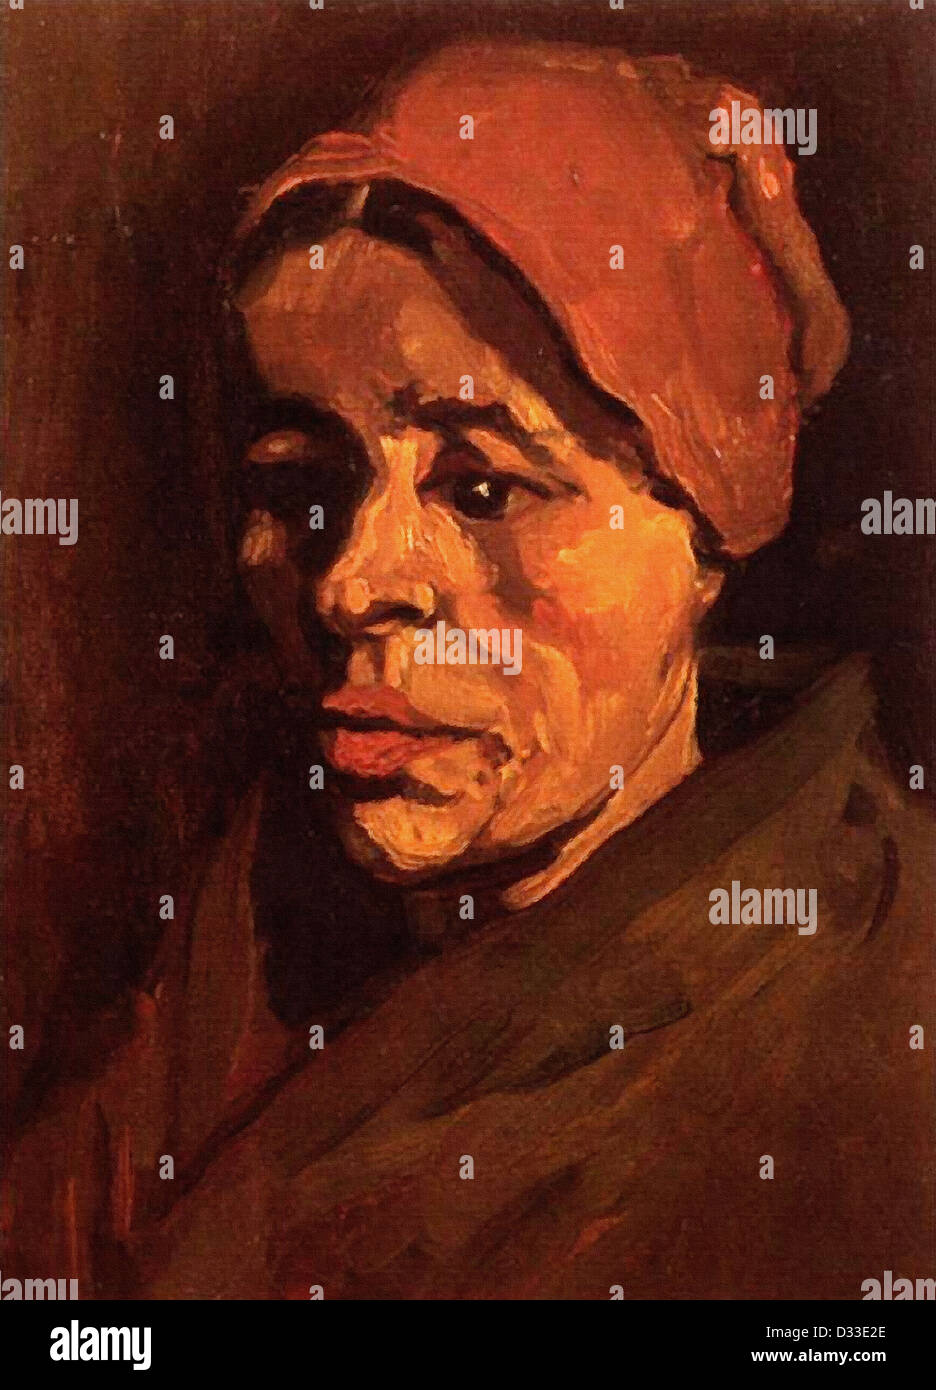 Vincent van Gogh: Head of a Peasant Woman with Brownish Cap. 1885. Oil on canvas. Rijksmuseum Kröller-Müller, Otterlo Stock Photo